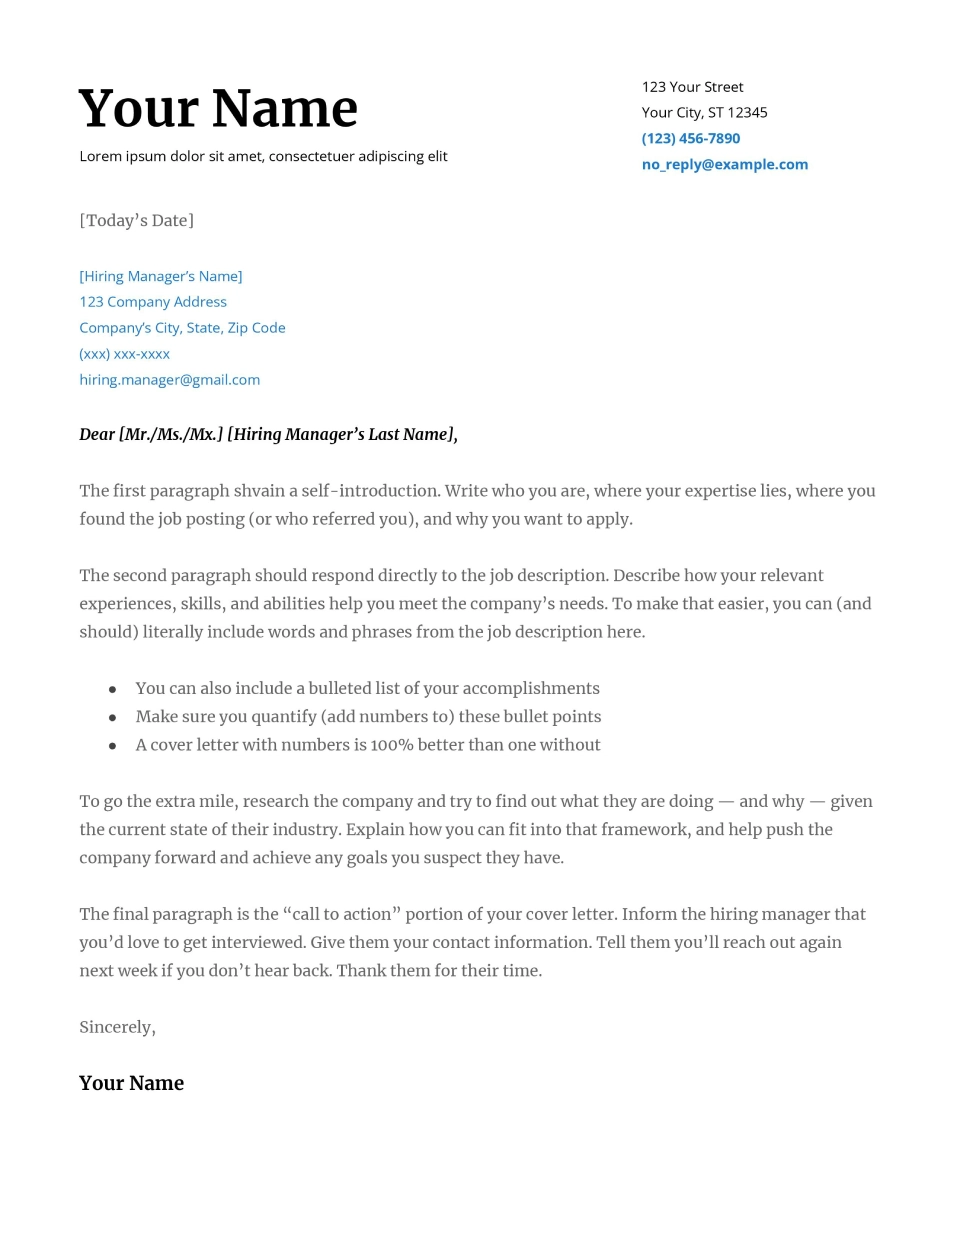 Serif Google Docs Cover Letter Template Page 001